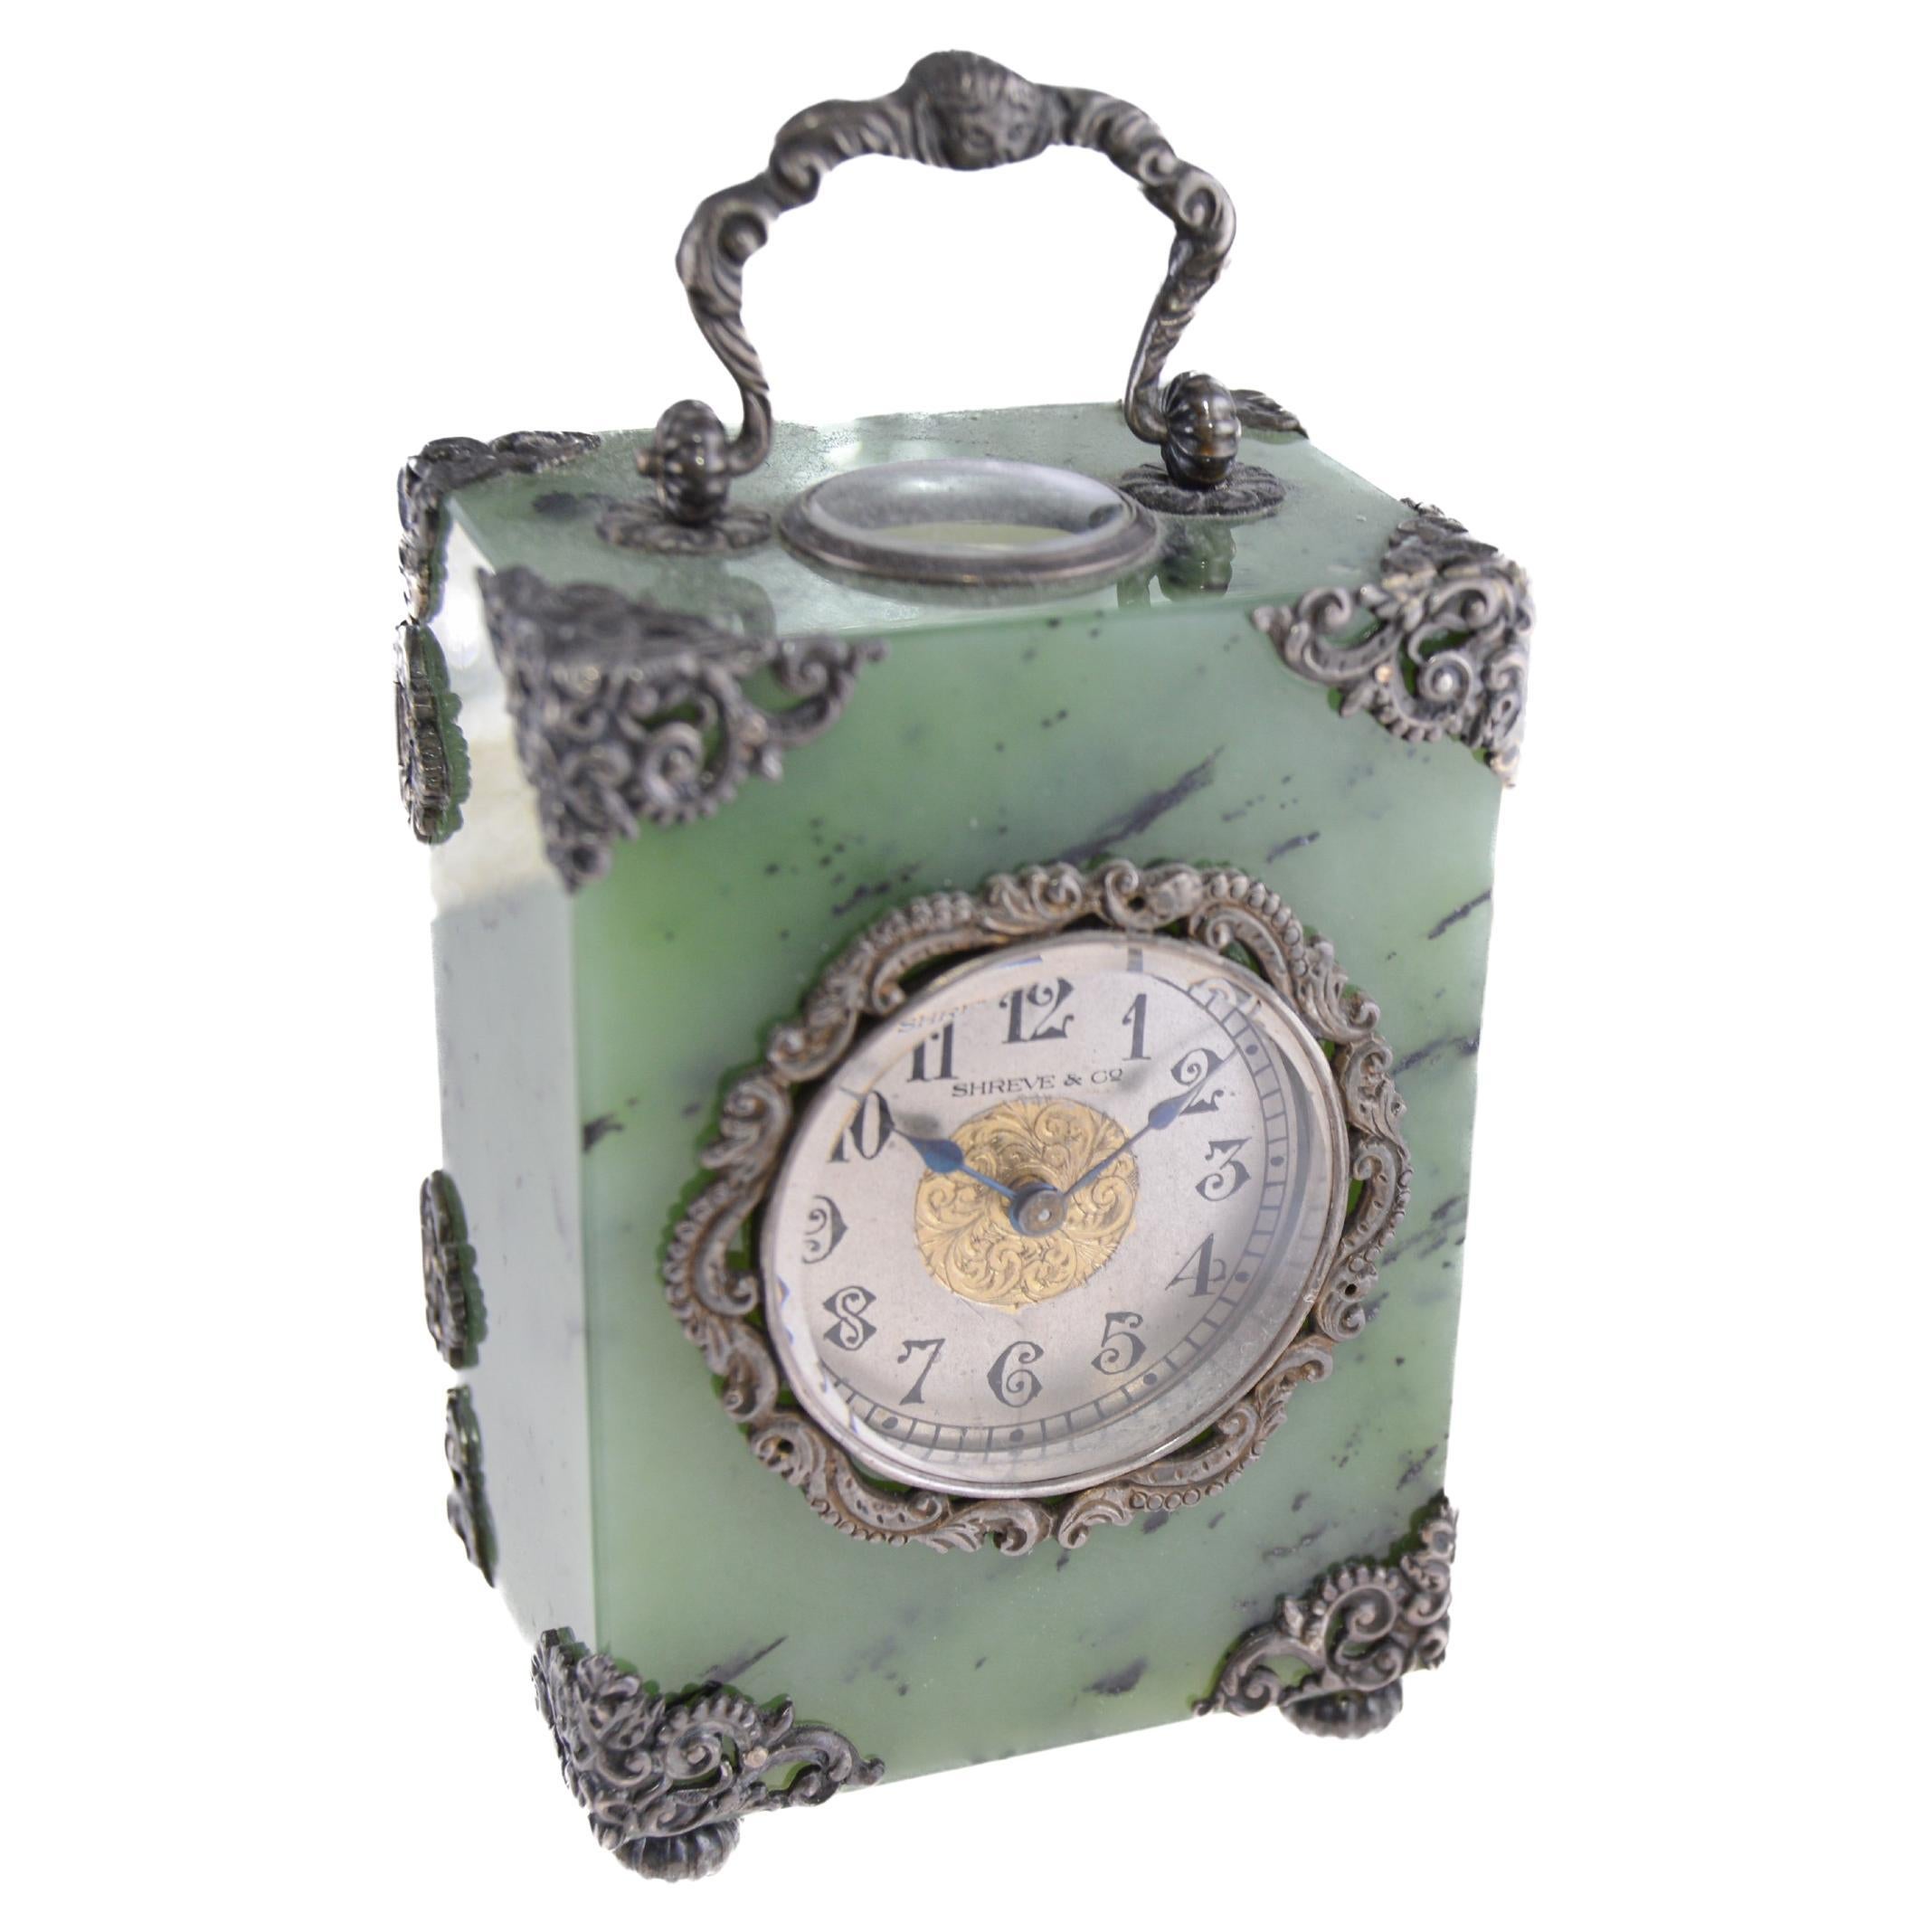 Shreve & Co Jade Carriage Clock with Exposed Escapement Sterling Hardware 1915 2